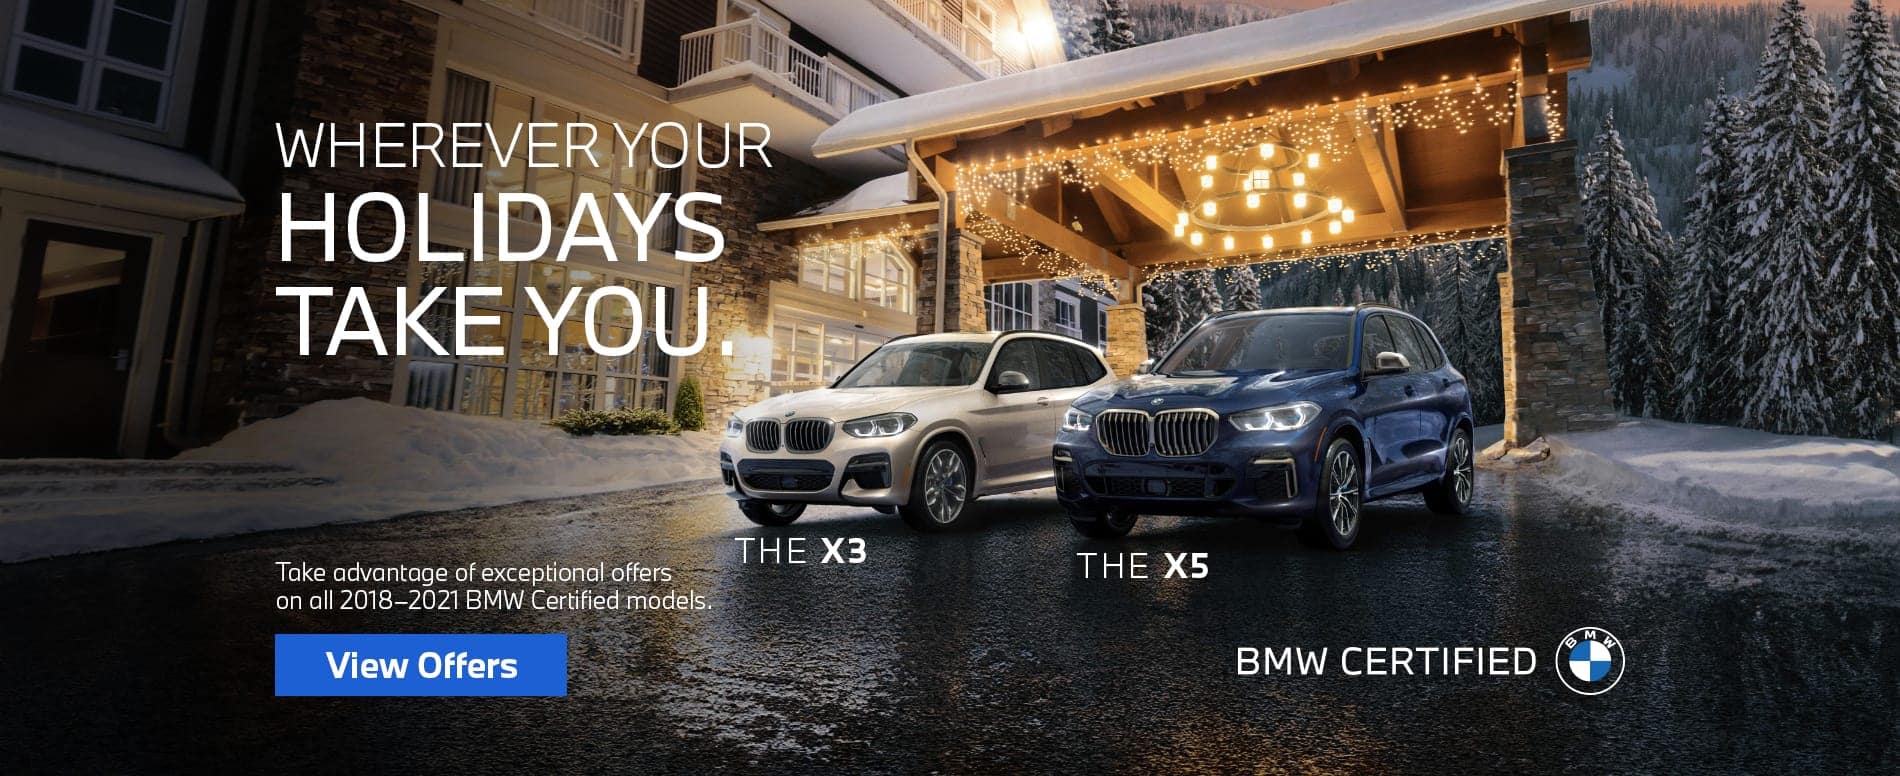 Wherever Your Holidays Take You. Take advantage of exceptional offers on all 2018-2021 BMW Certified models.